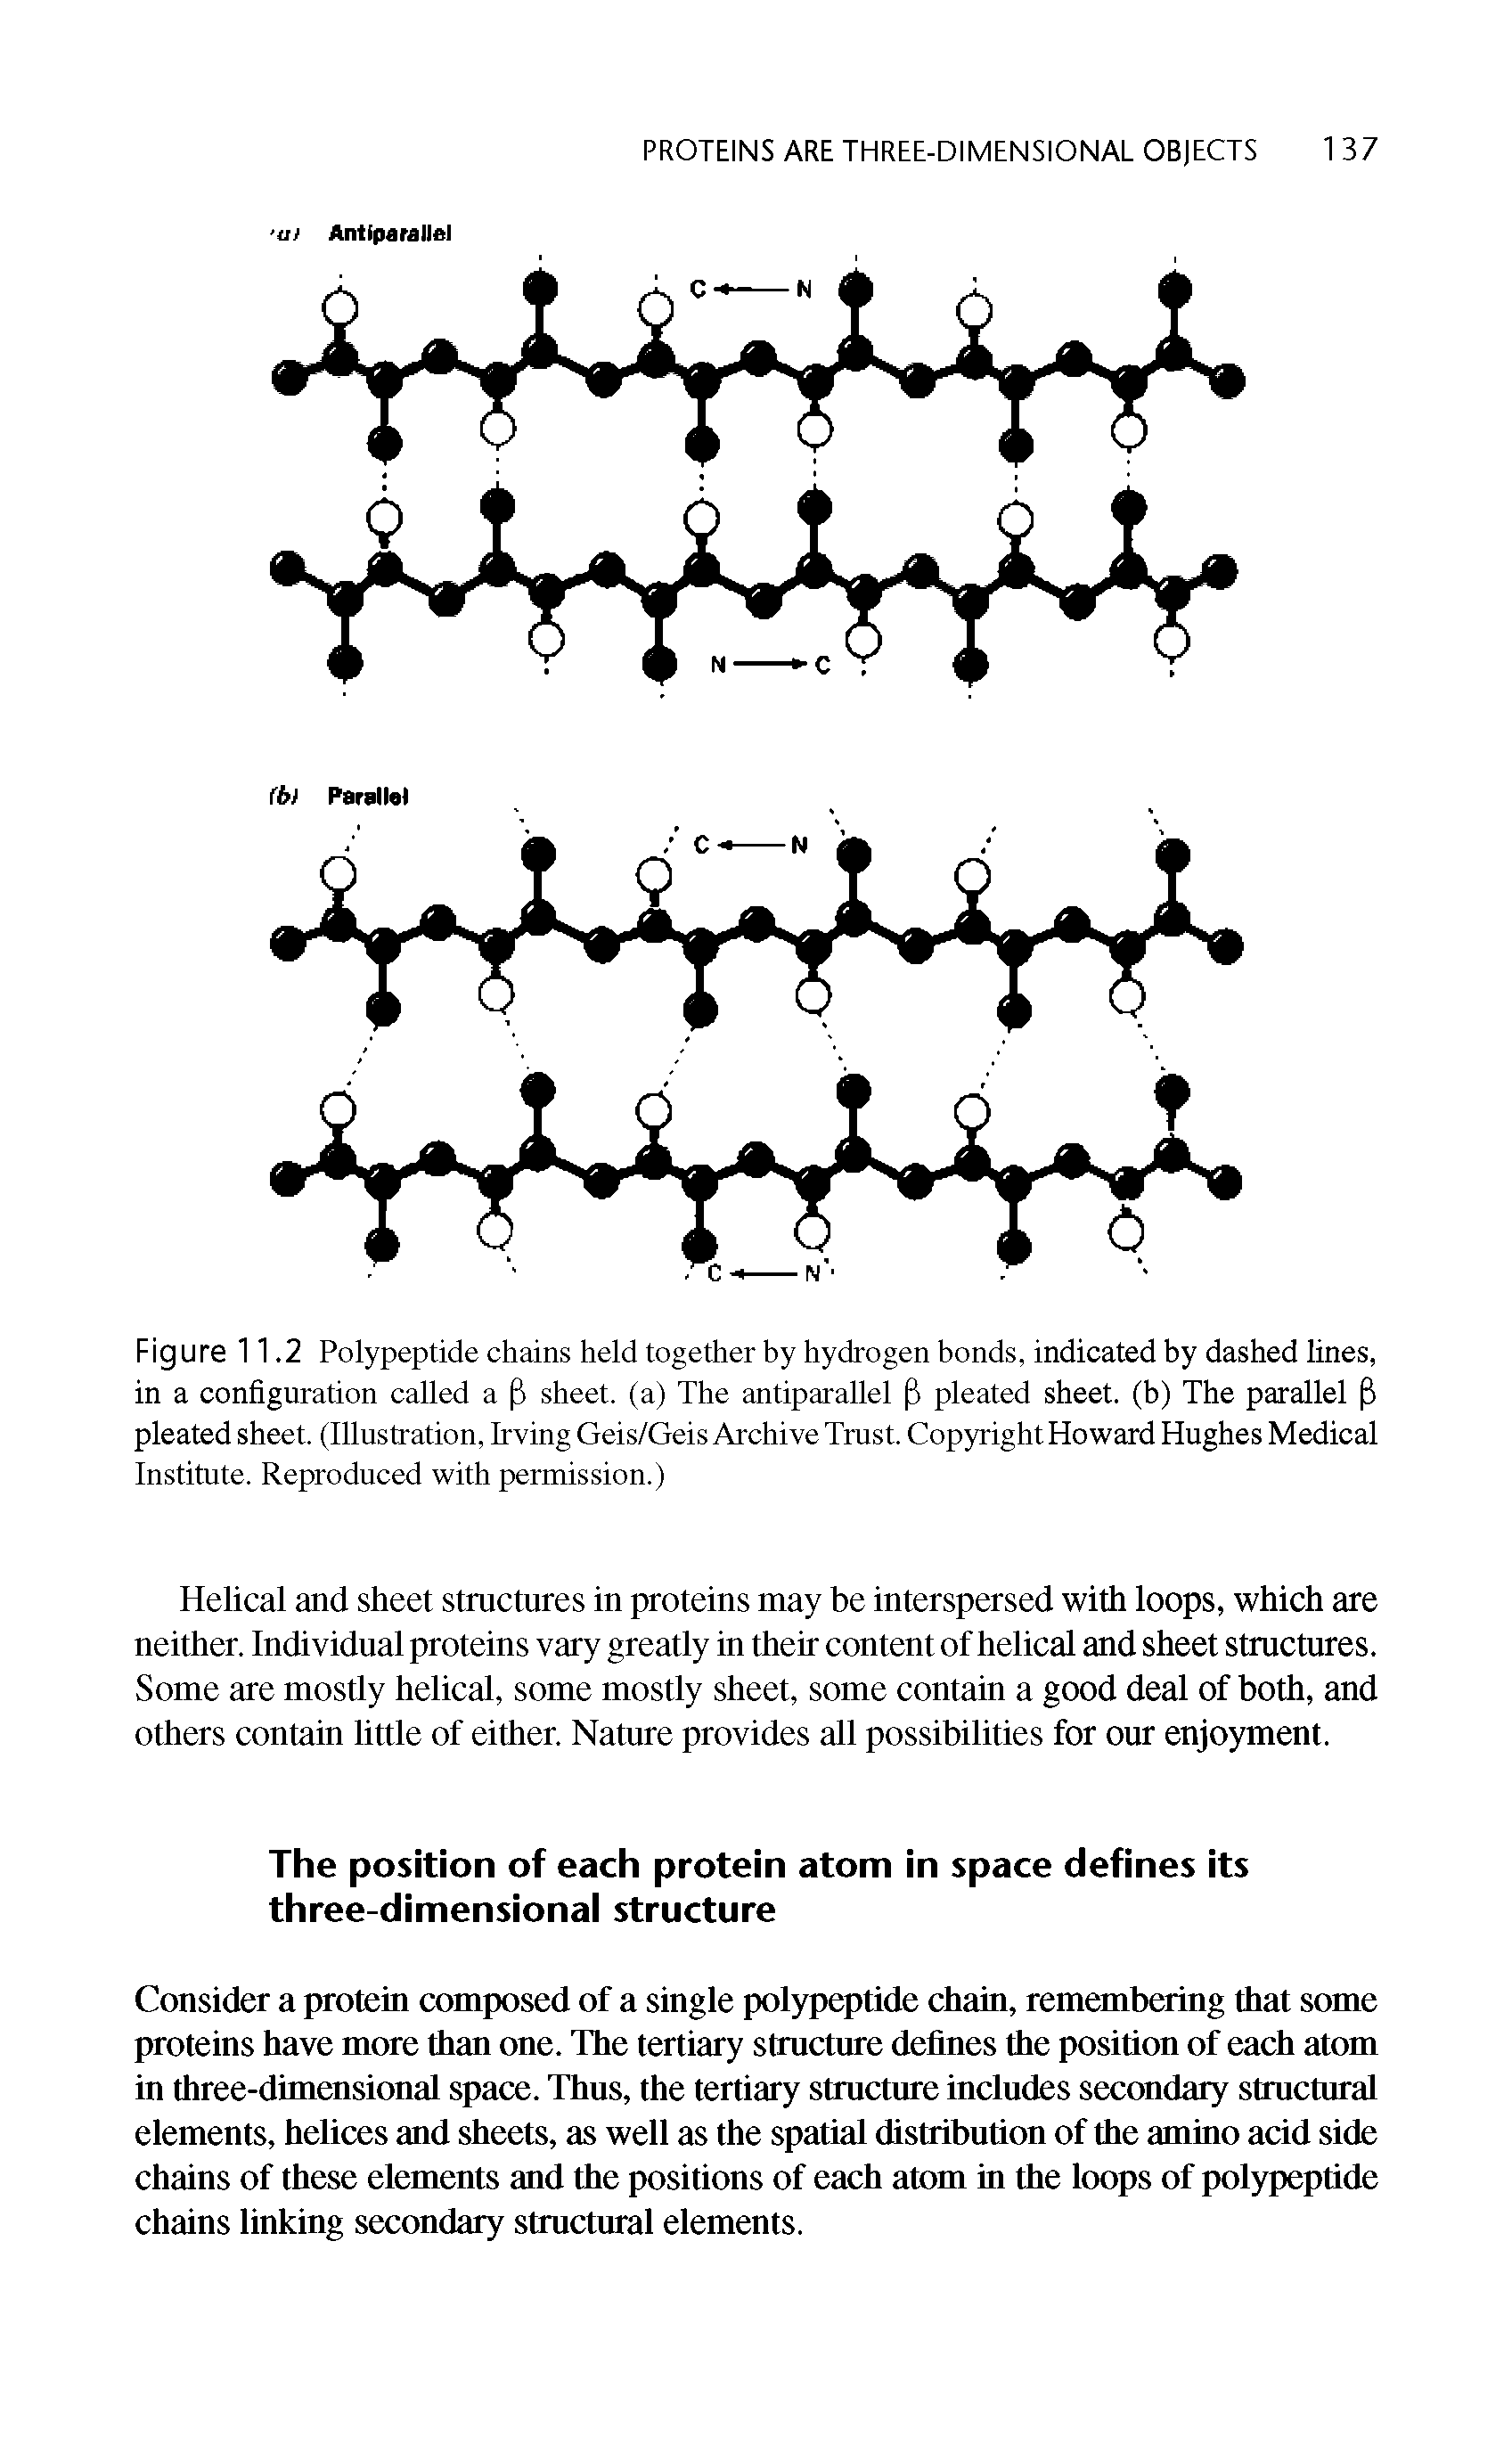 Figure 11.2 Polypeptide chains held together by hydrogen bonds, indicated by dashed lines, in a configuration called a P sheet, (a) The antiparallel P pleated sheet, (b) The parallel P pleated sheet. (Illustration, Irving Geis/Geis Archive Trust. Copyright Howard Hughes Medical Institute. Reproduced with permission.)...